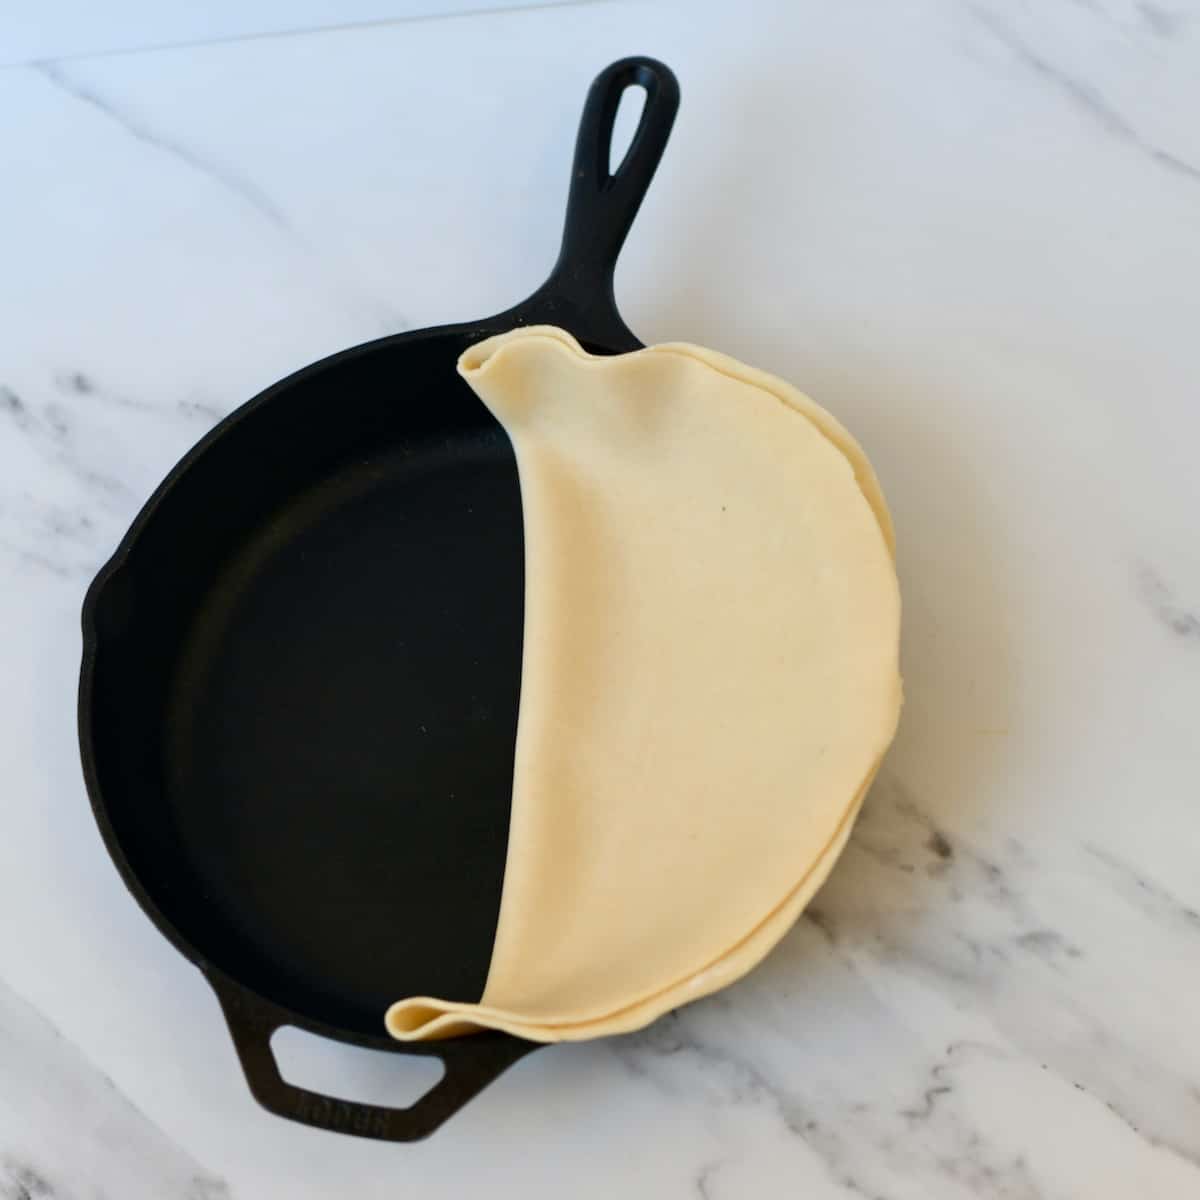 Unbaked pie crust dough folded in half in a cast iron skillet.